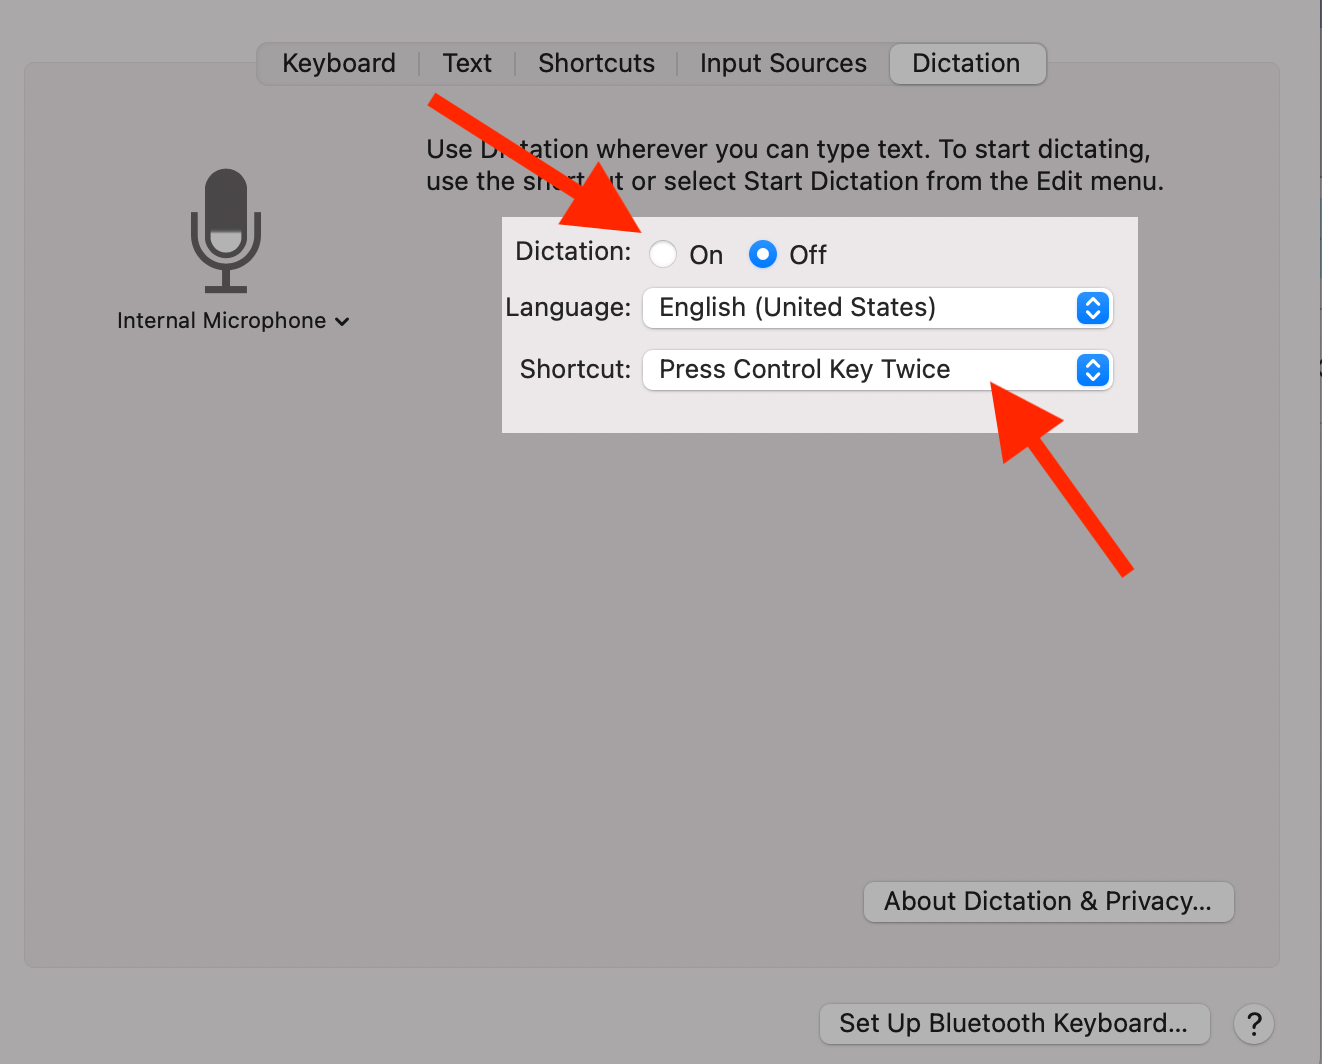 Two red arrows, one pointing to the Dictation option, the other pointing to the Shortcut option